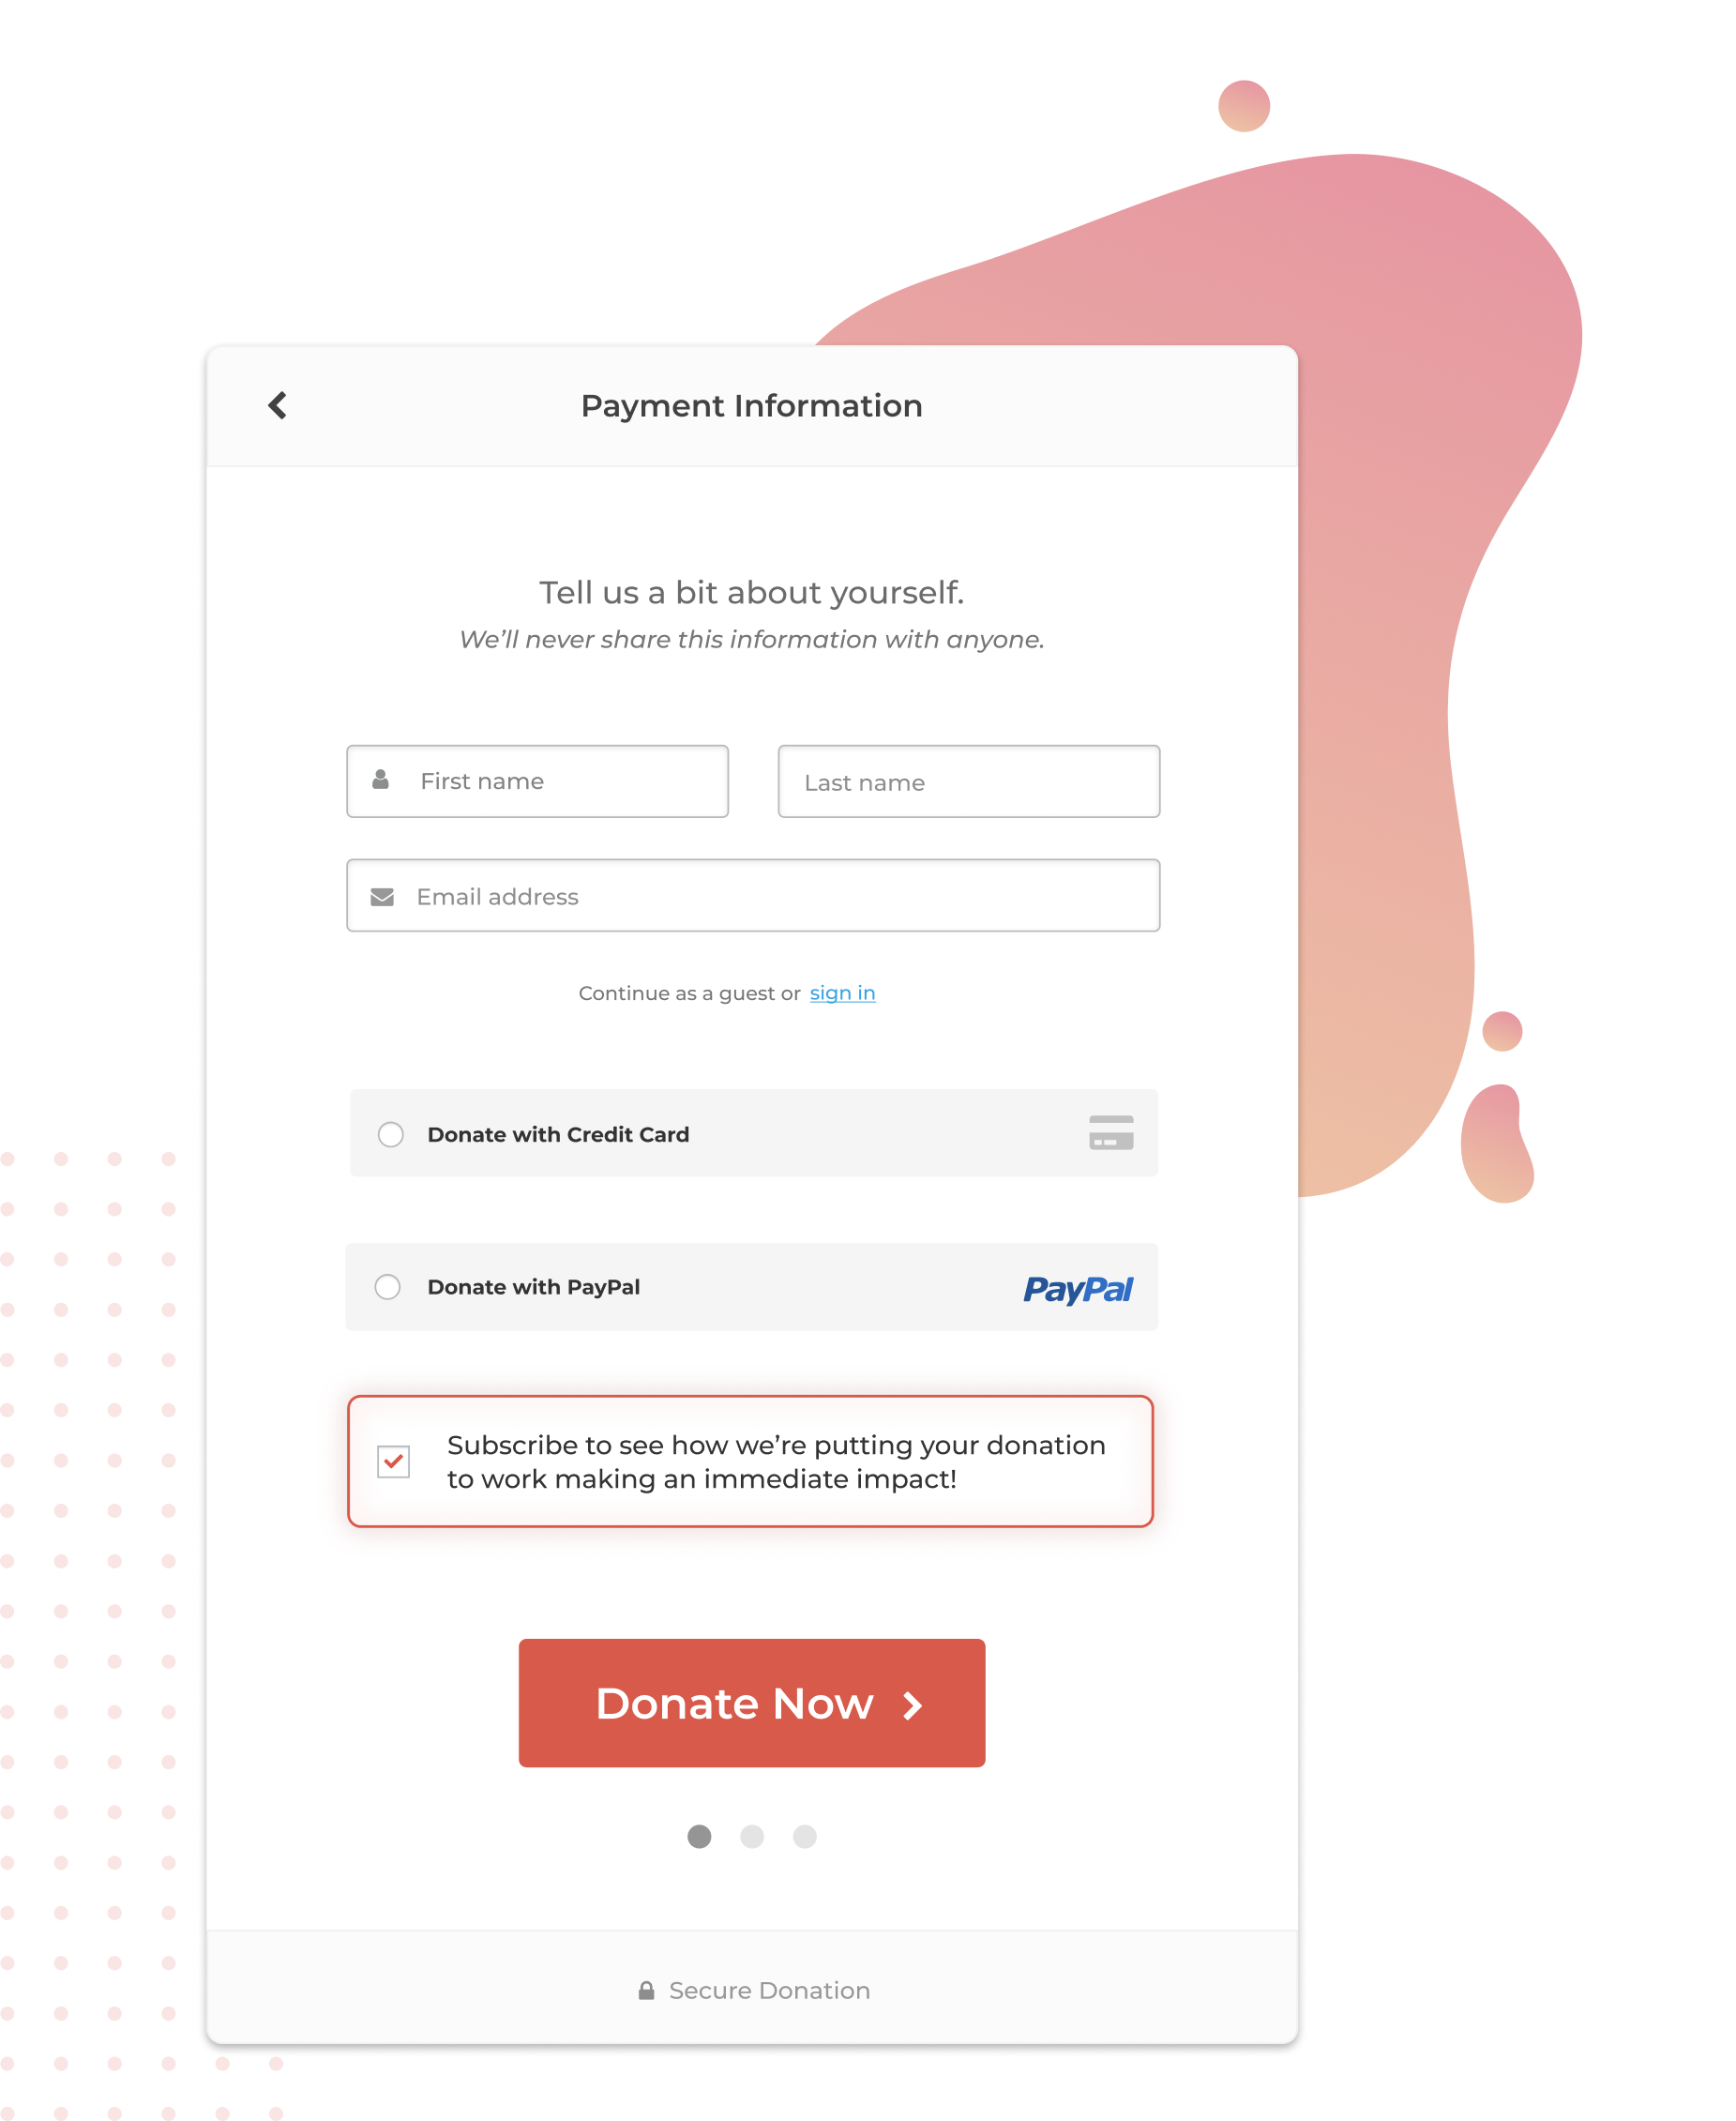 The donation form has an ActiveCampaign email opt-in that donors can choose to select or deselect.